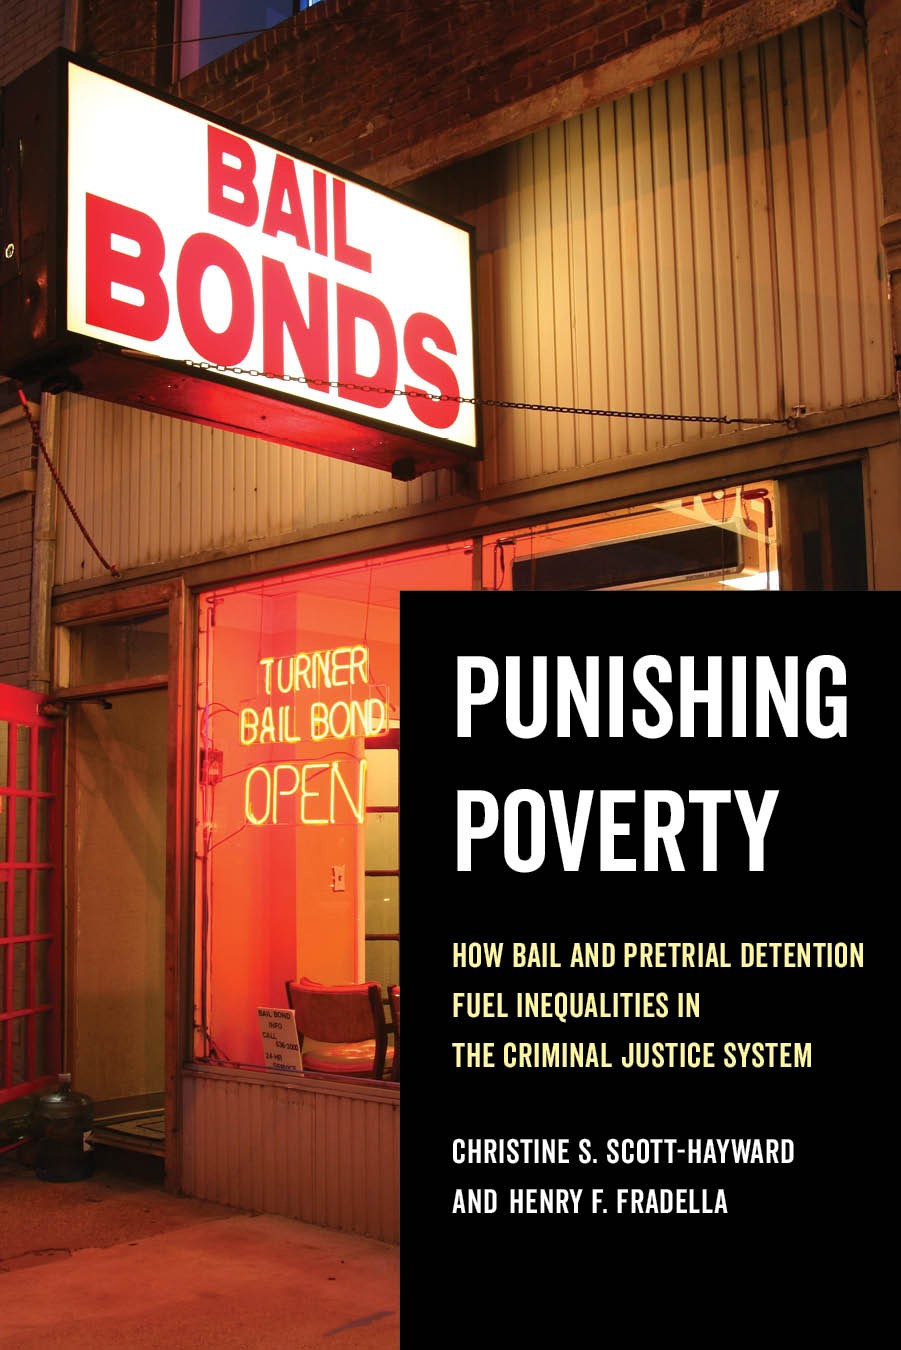 Book cover - Punishing poverty: How bail and pretrial detention fuel inequalities in the criminal justice system